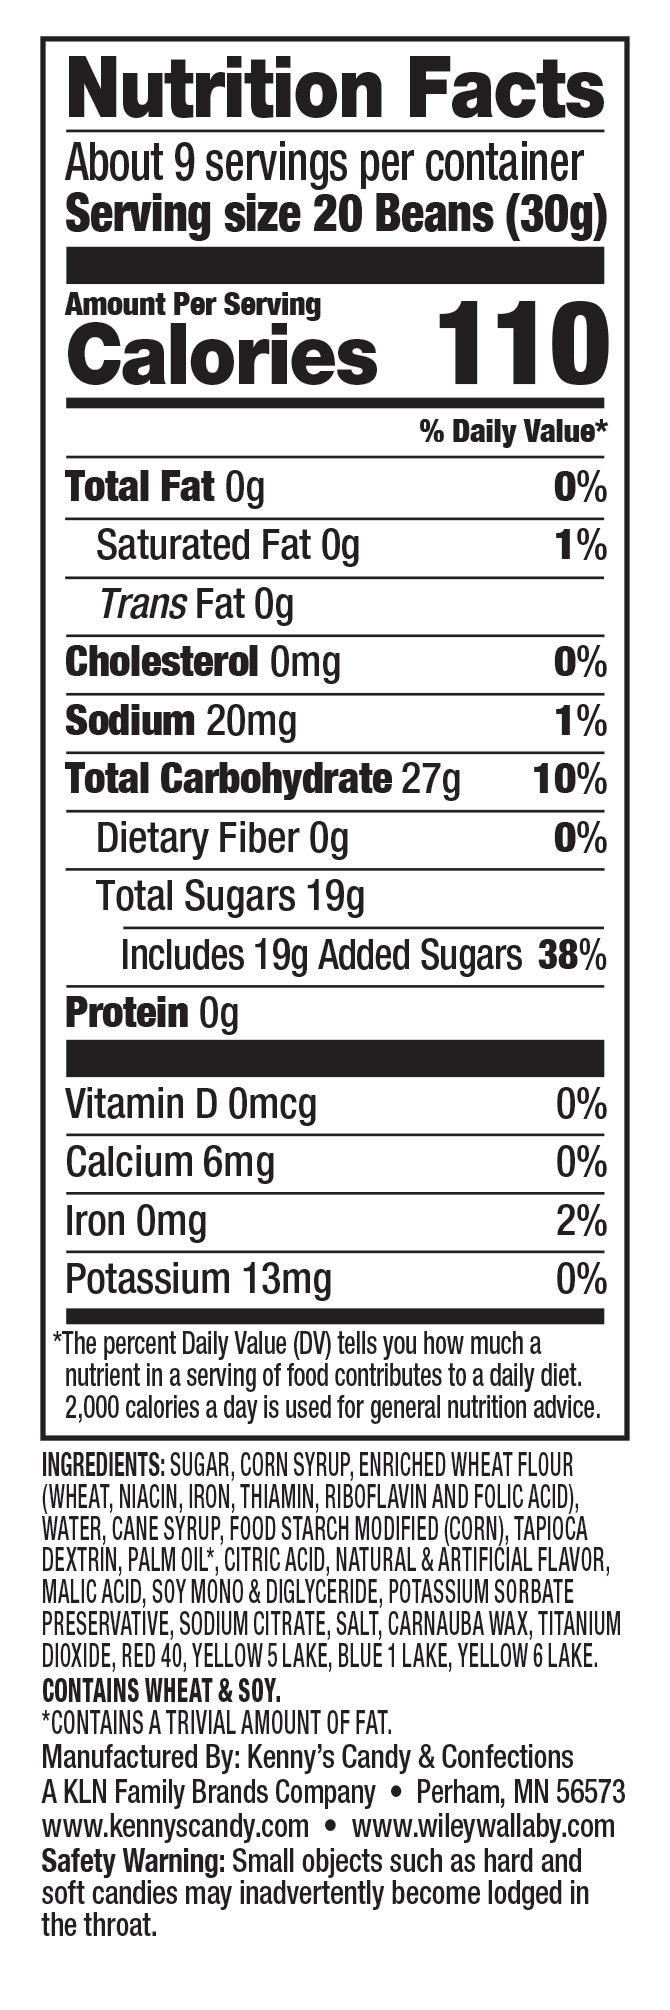 Nutrition Facts: Red Licorice Beans